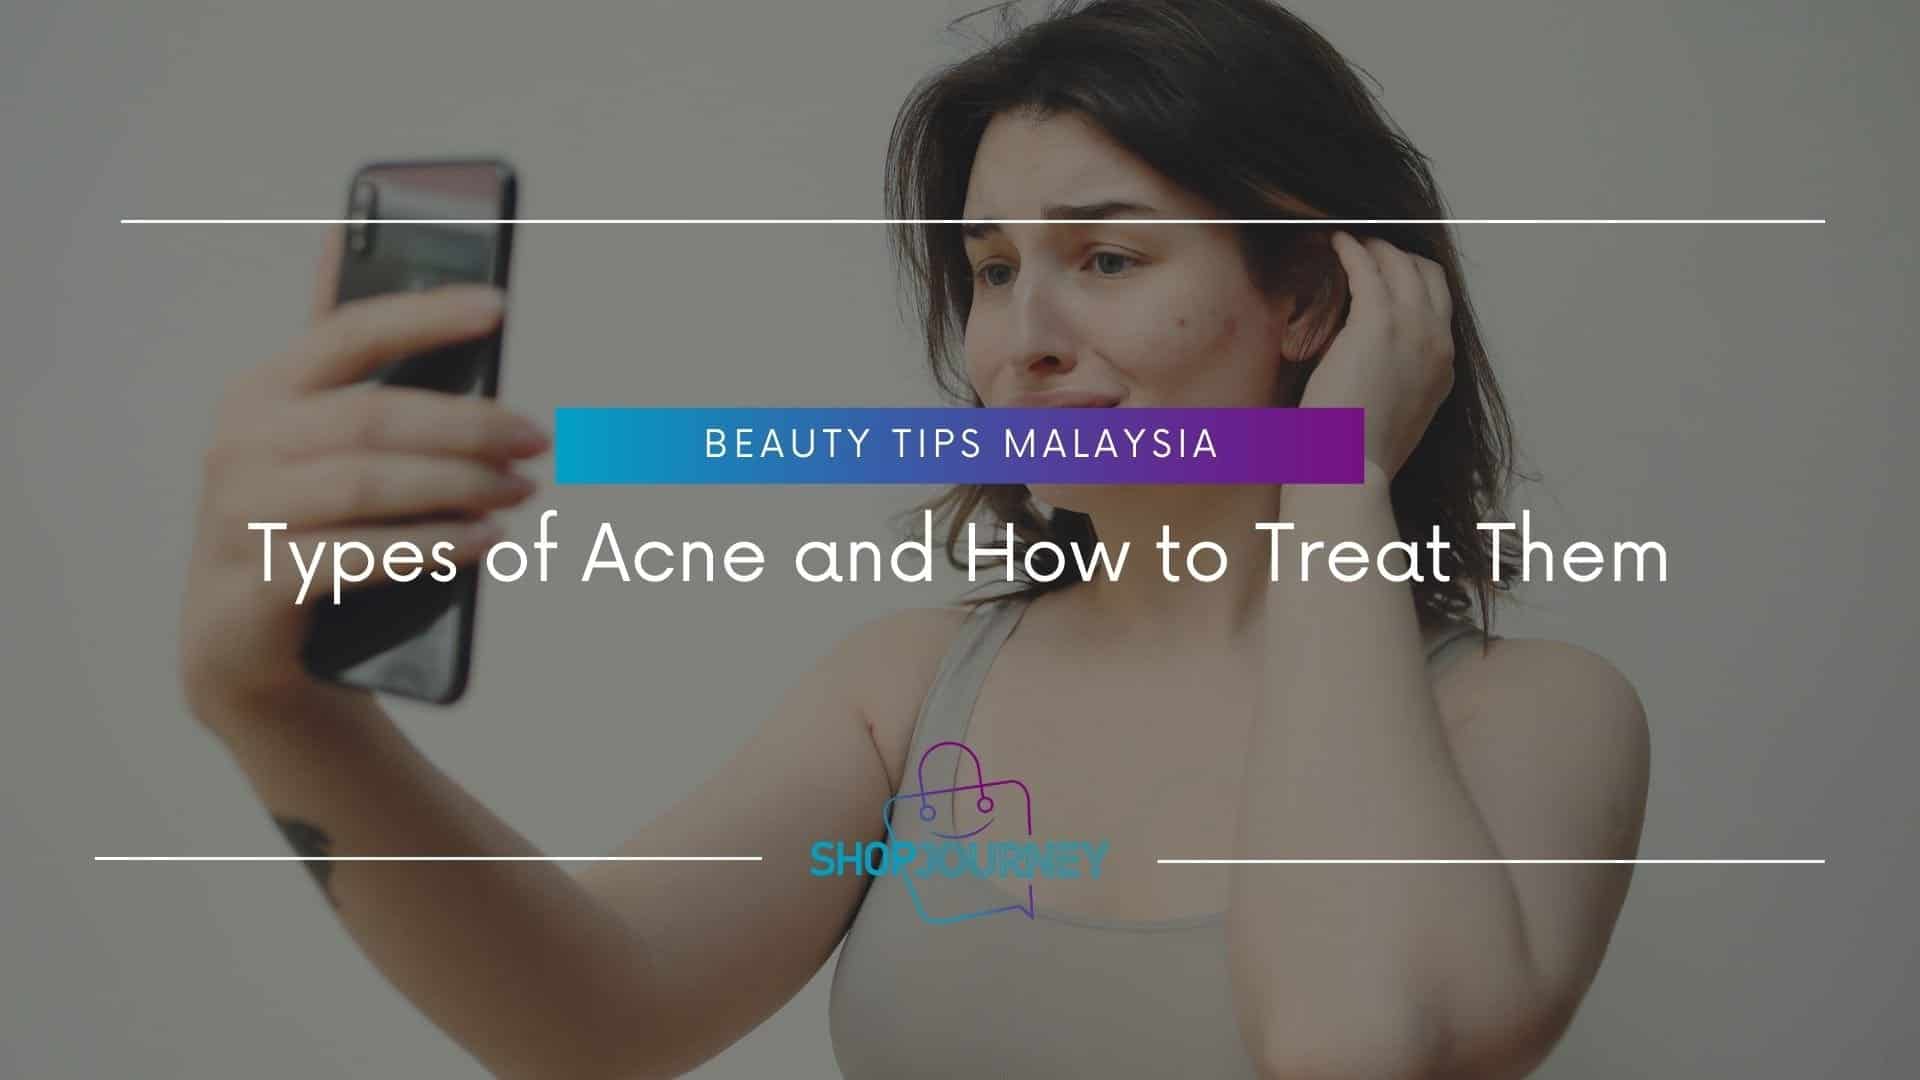 Types of Acne and How to Treat Them - Shop Journey Malaysia